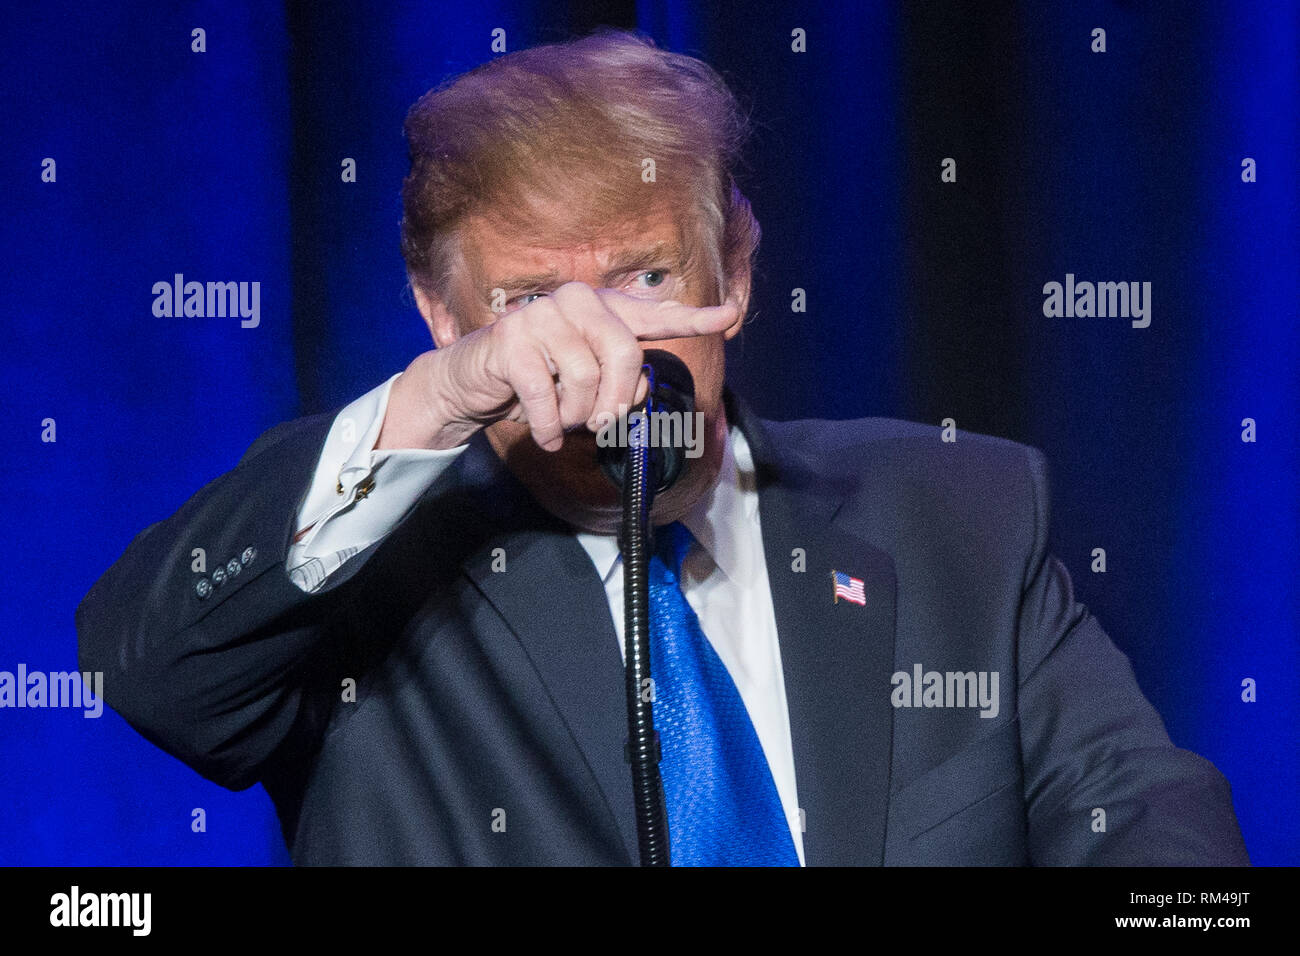 Washington DC, USA. 13th Feb 2019. US President Donald J. Trump gestures while delivering remarks at the Major County Sheriffs and Major Cities Chiefs Association Joint Conference, in Washington, DC, USA, 13 February 2019. Republican leaders are asking Trump to sign legislation that allocates about 1.375 billion USD (1.218 billion euros) for over fifty miles of physical barriers along the border. Credit: MediaPunch Inc/Alamy Live News Stock Photo